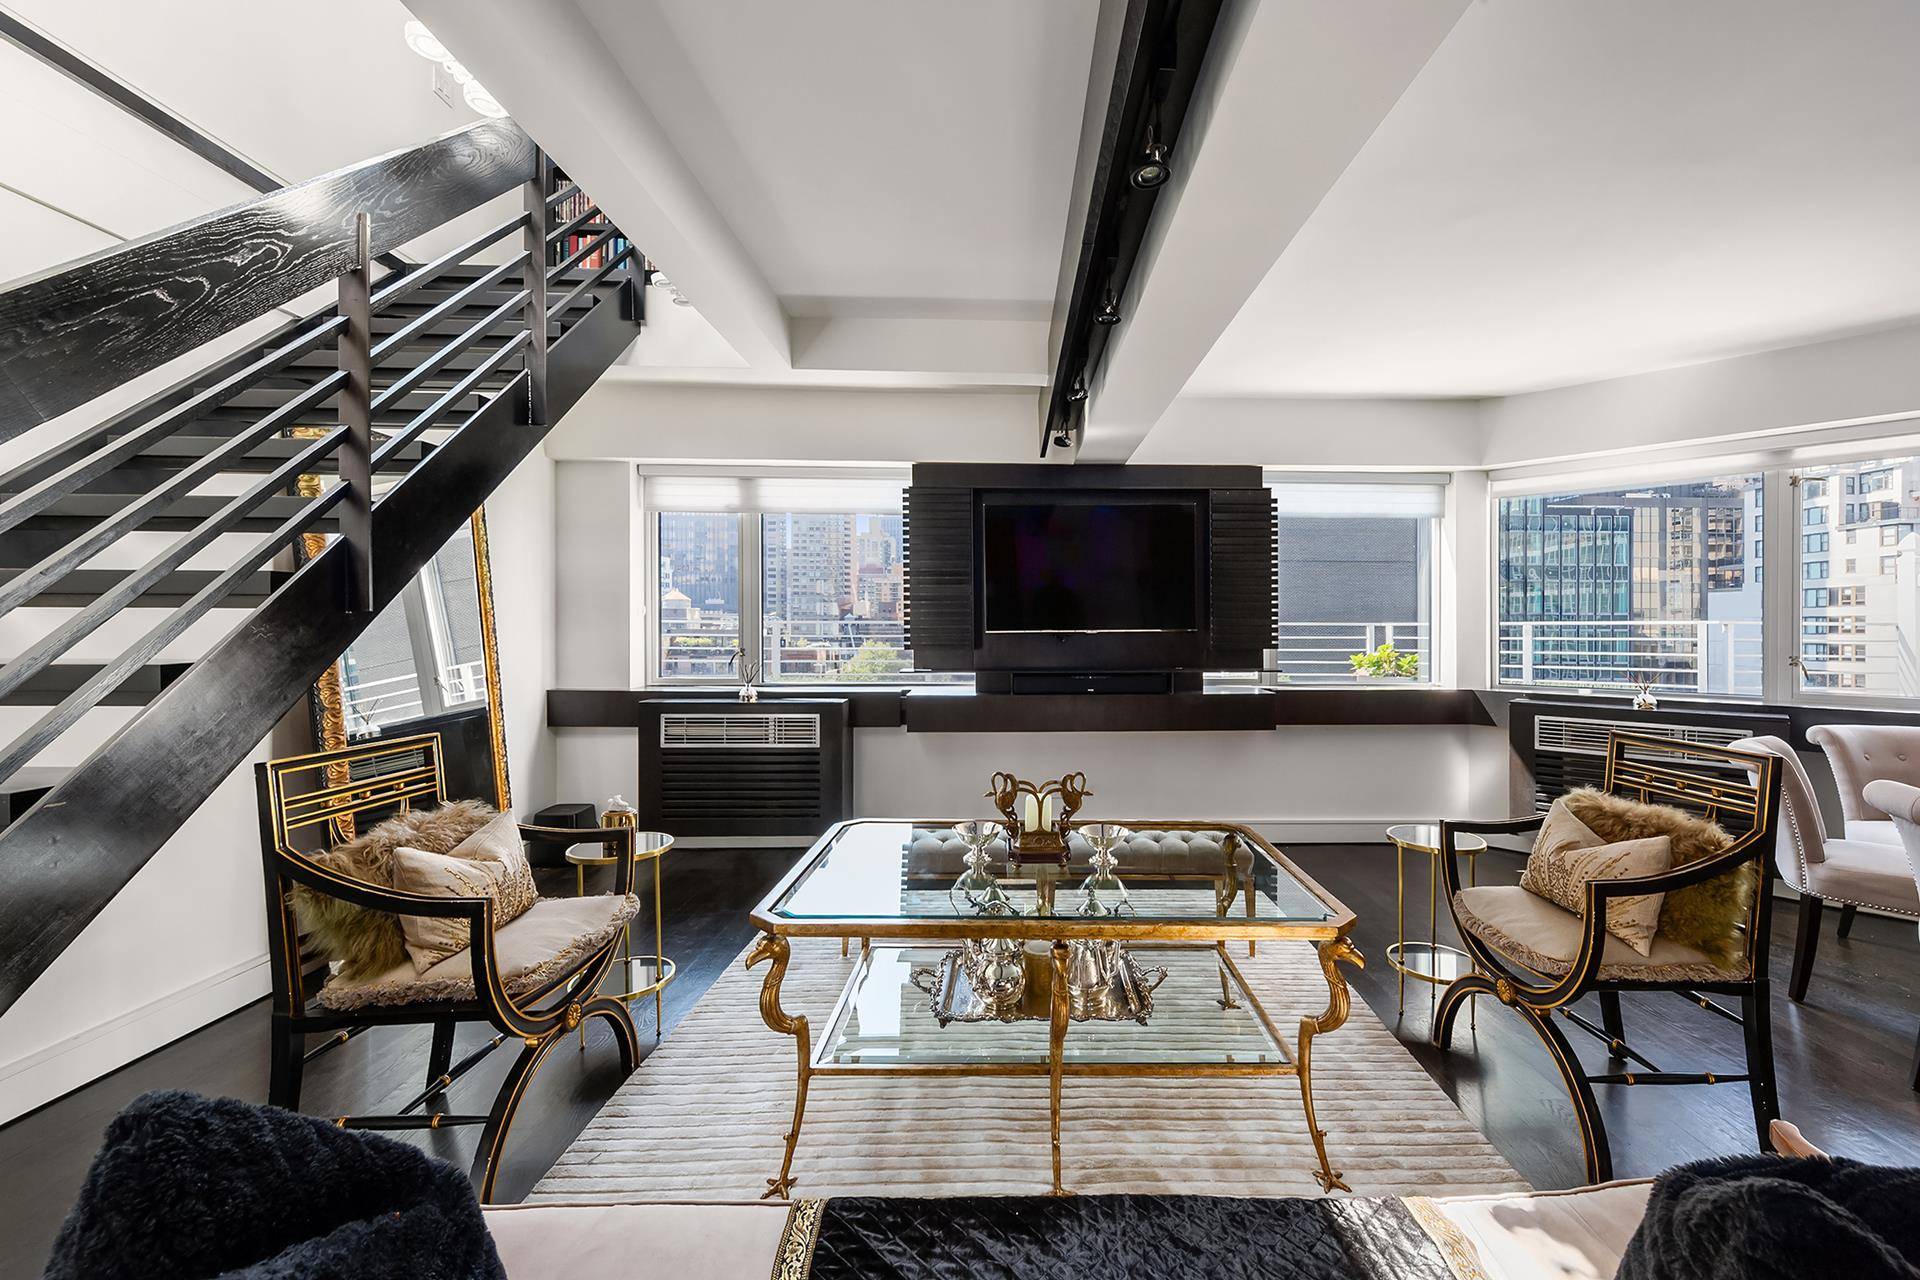 This sun flooded duplex penthouse boasts 3, 175 square feet of generously proportioned rooms as well as squa2, 000 square feet of private outdoor space on both levels.